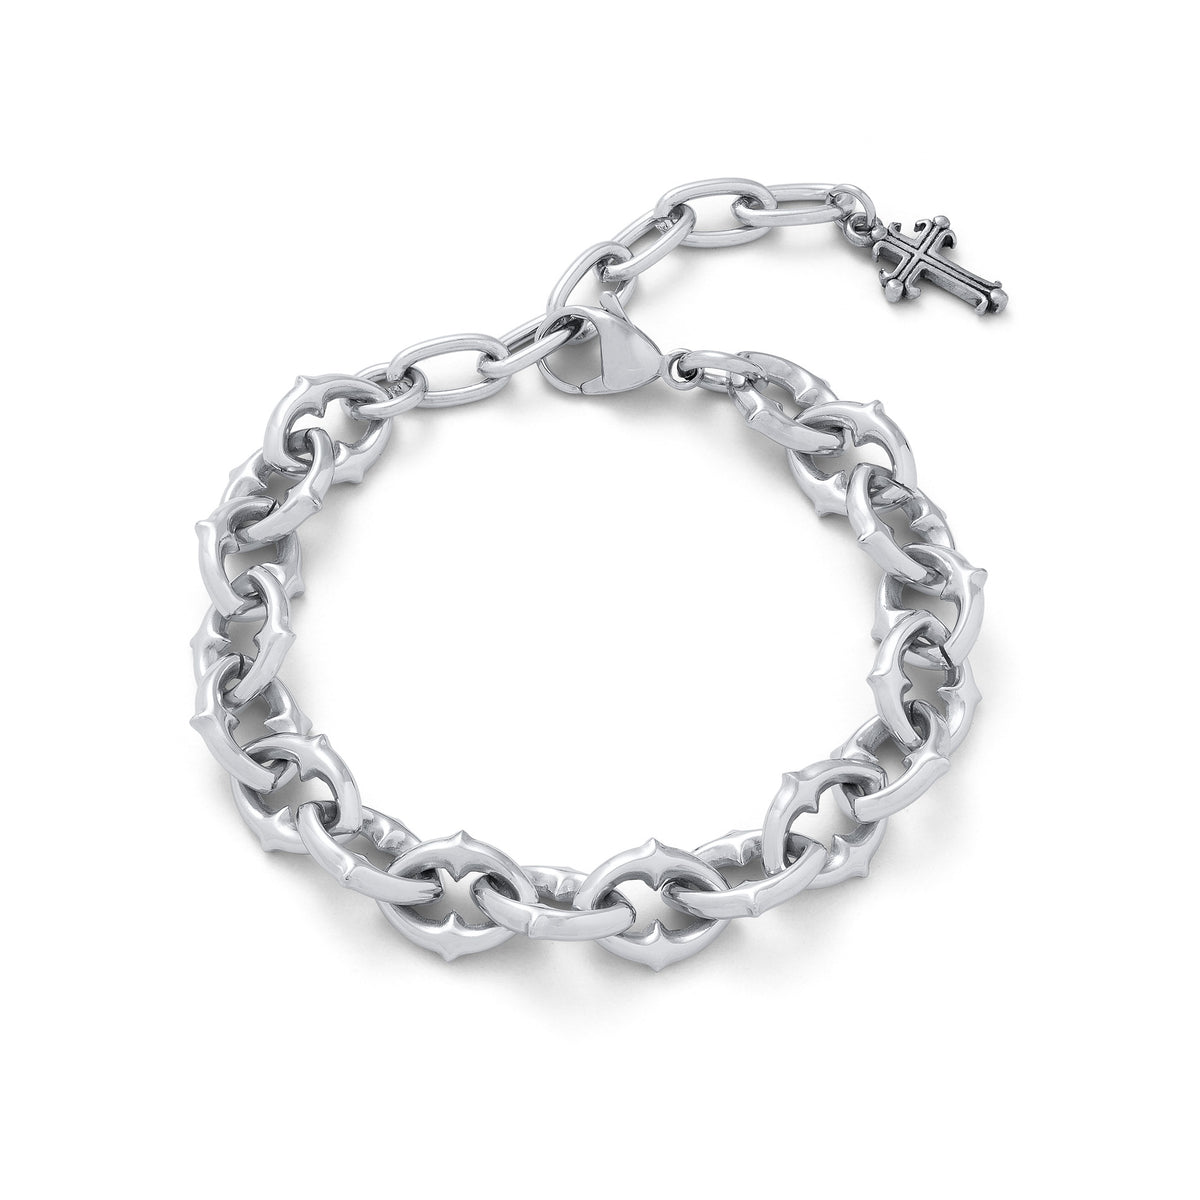 medieval spiked chain bracelet in silver